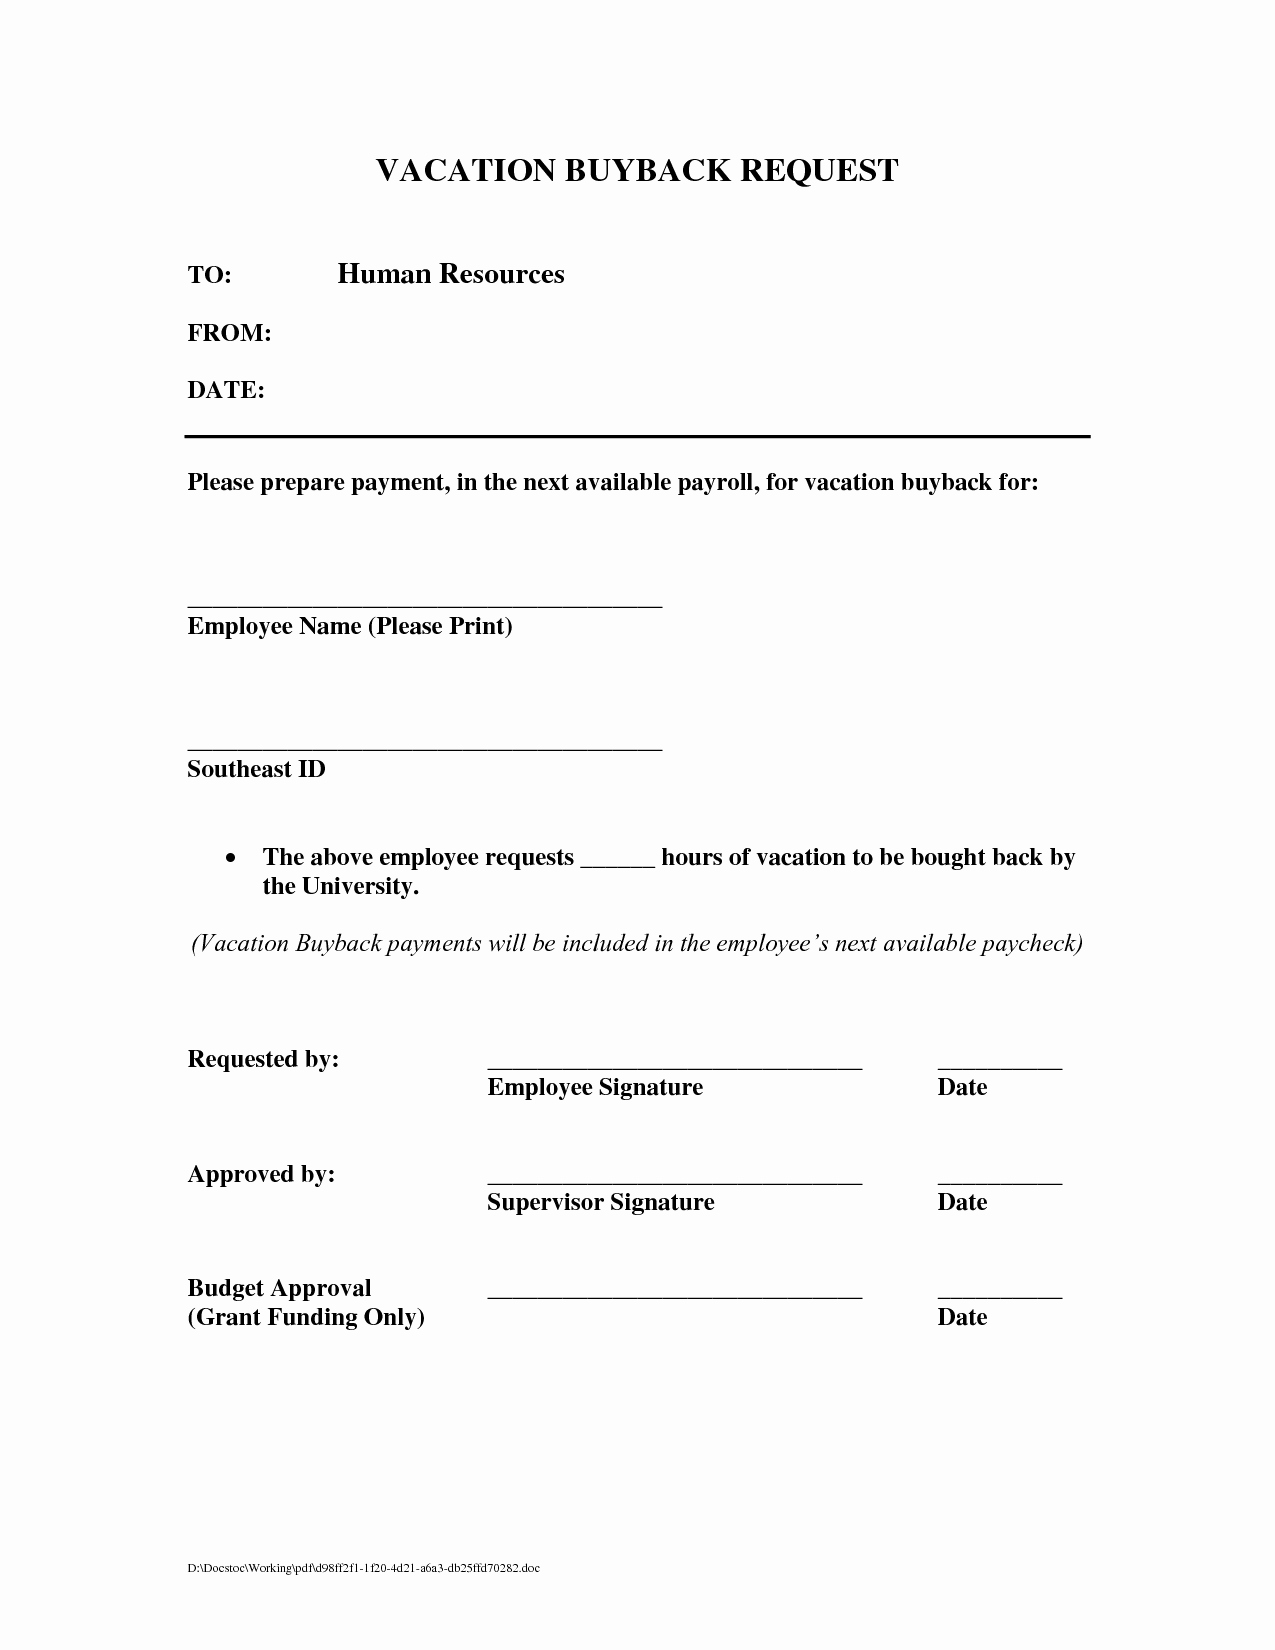 Vacation Request form Template Lovely Vacation Request form Template – Teplates for Every Day